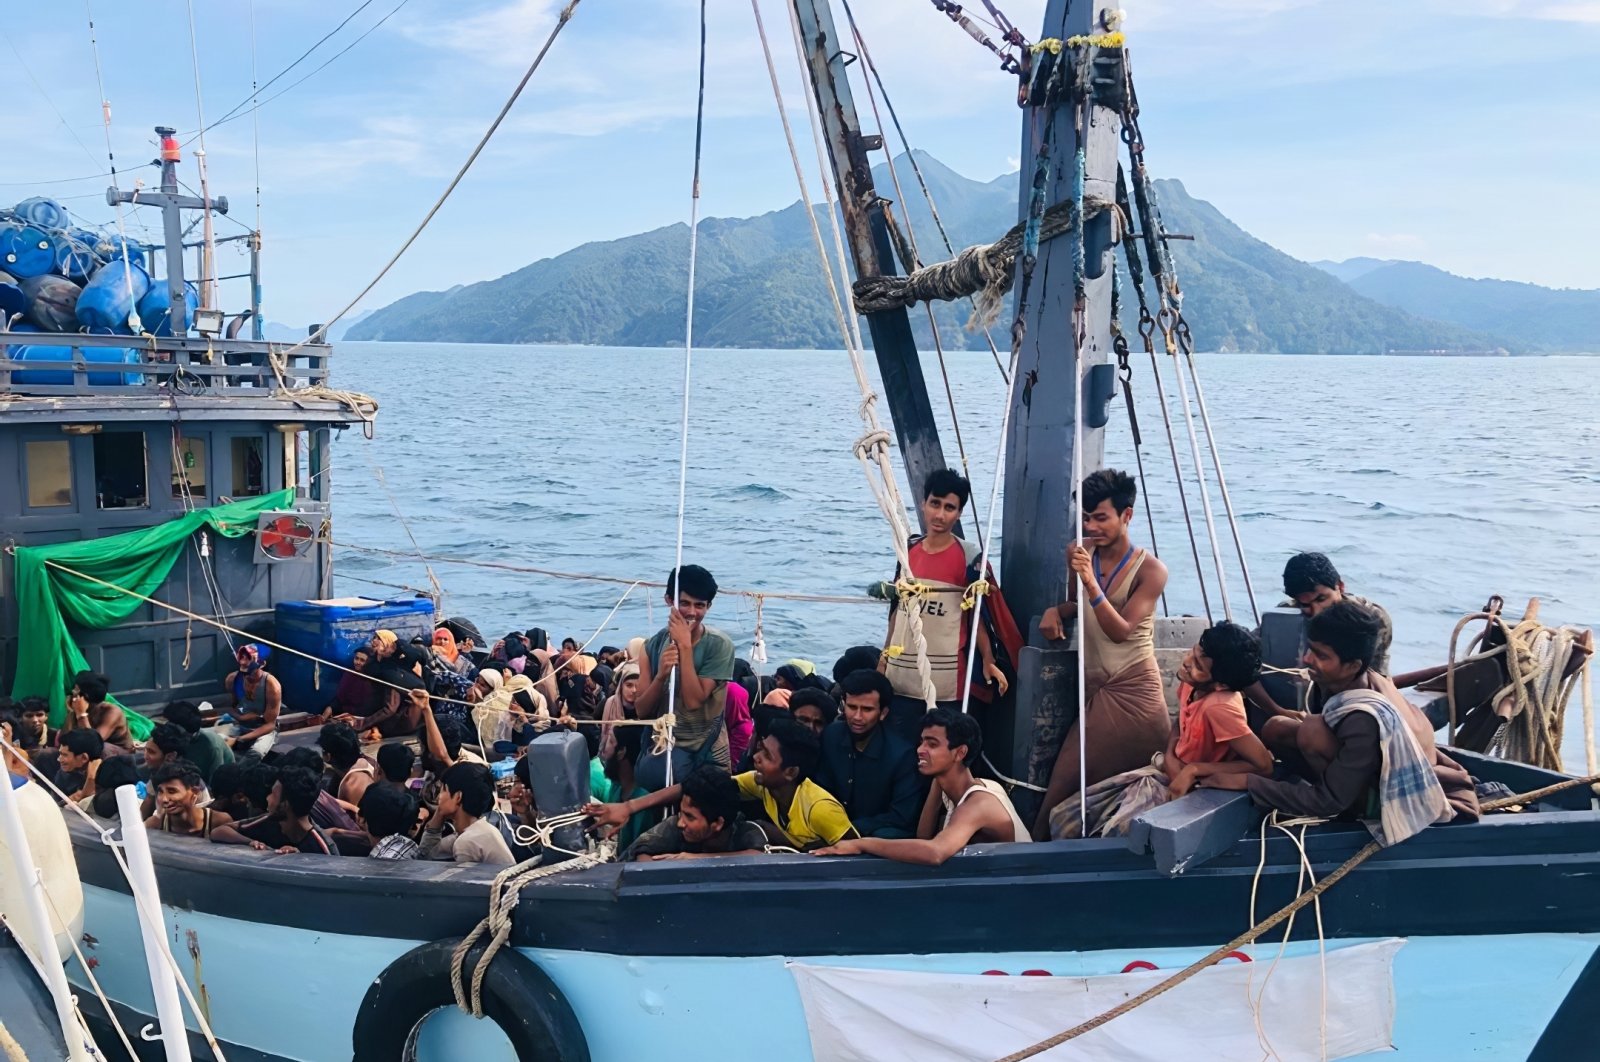 A wooden boat carries suspected Rohingya migrants detained in Malaysian territorial waters off the island of Langkawi, Malaysia, April 5, 2020. (Malaysian Maritime Enforcement Agency via AP)